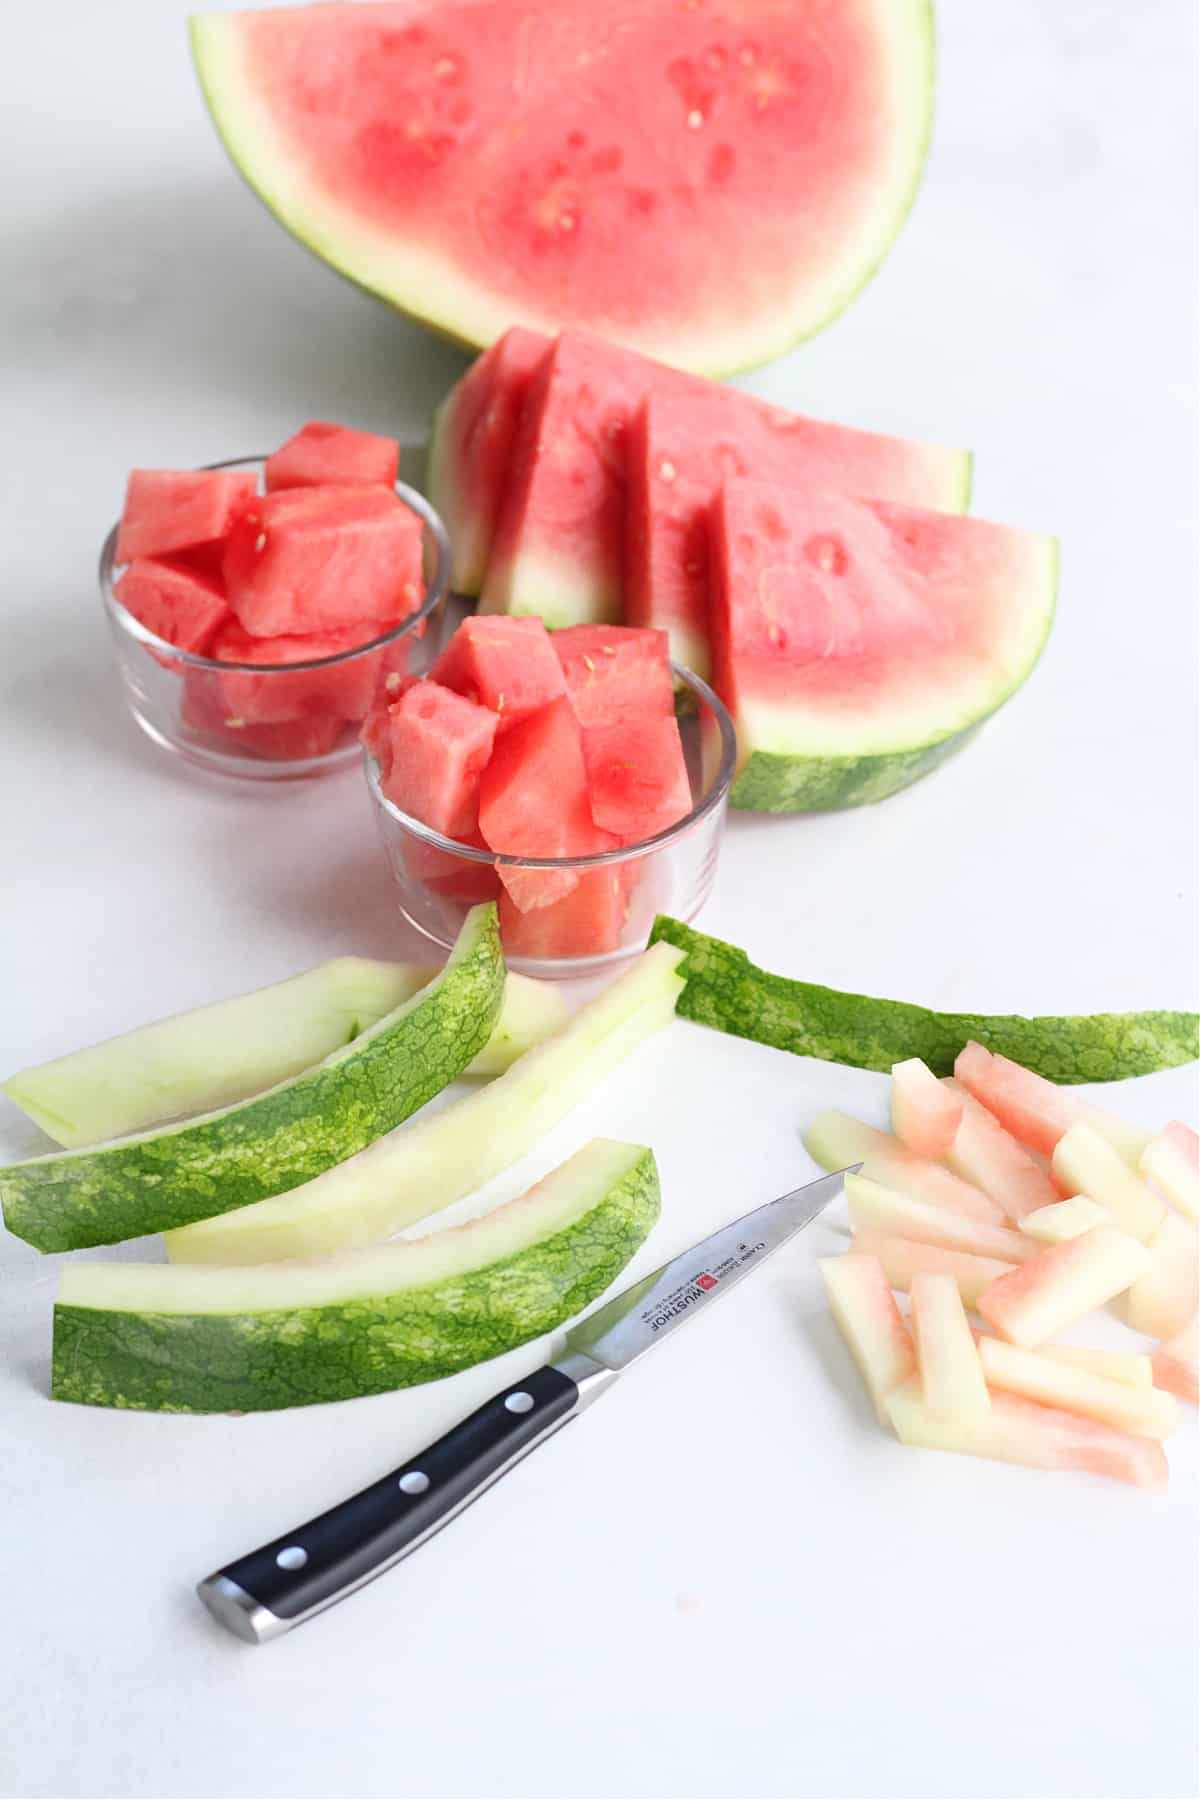 How to prepare Watermelon Rind